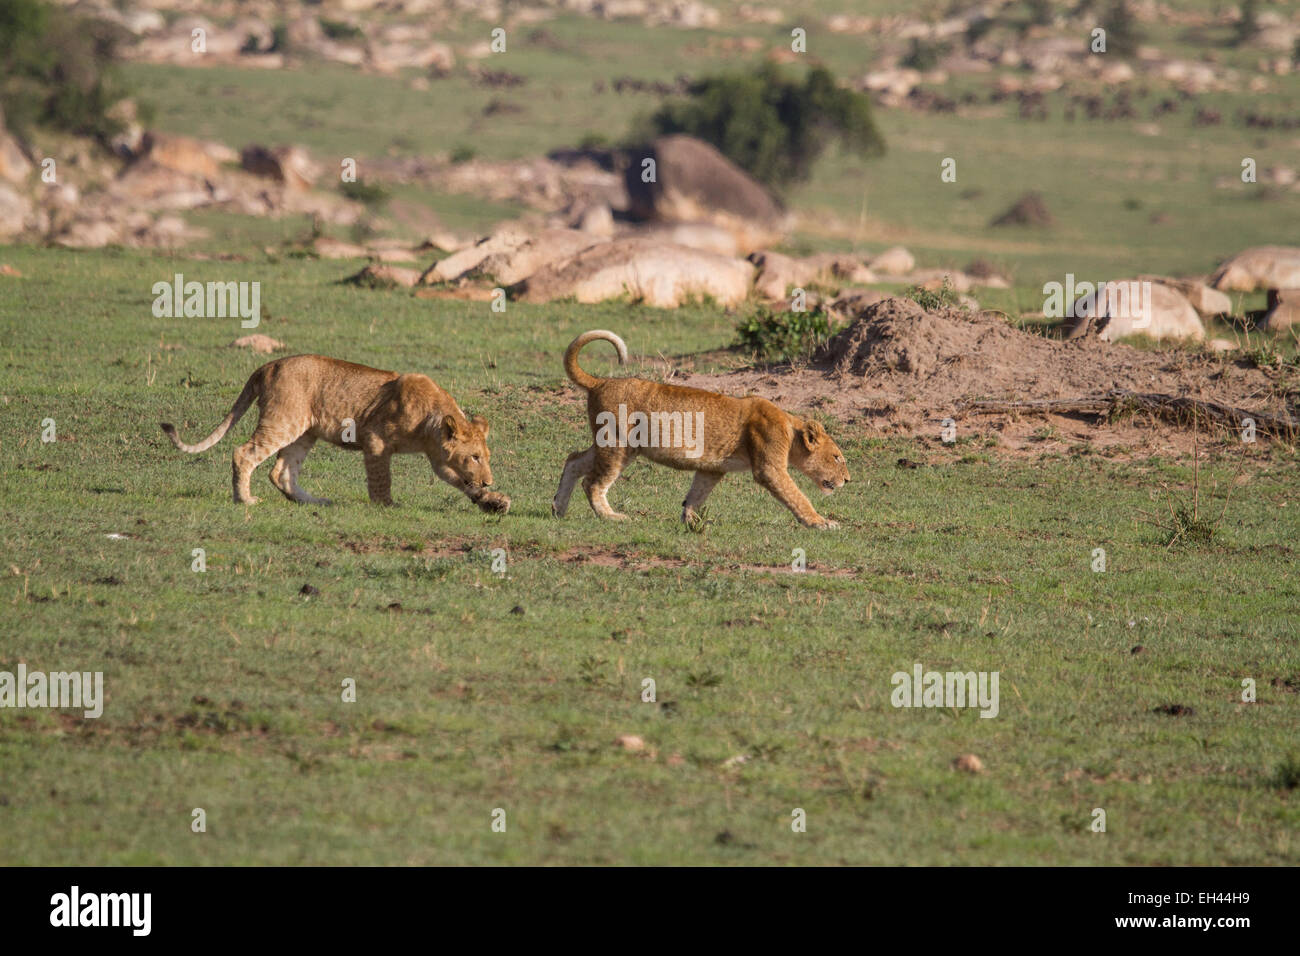 Lion (Panthera leo) two lion cubs prowling Stock Photo